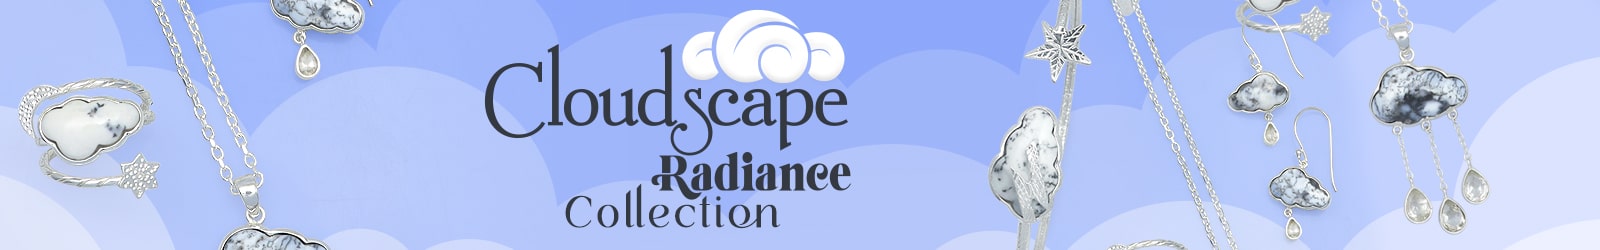 Cloudscape Radiance Collection